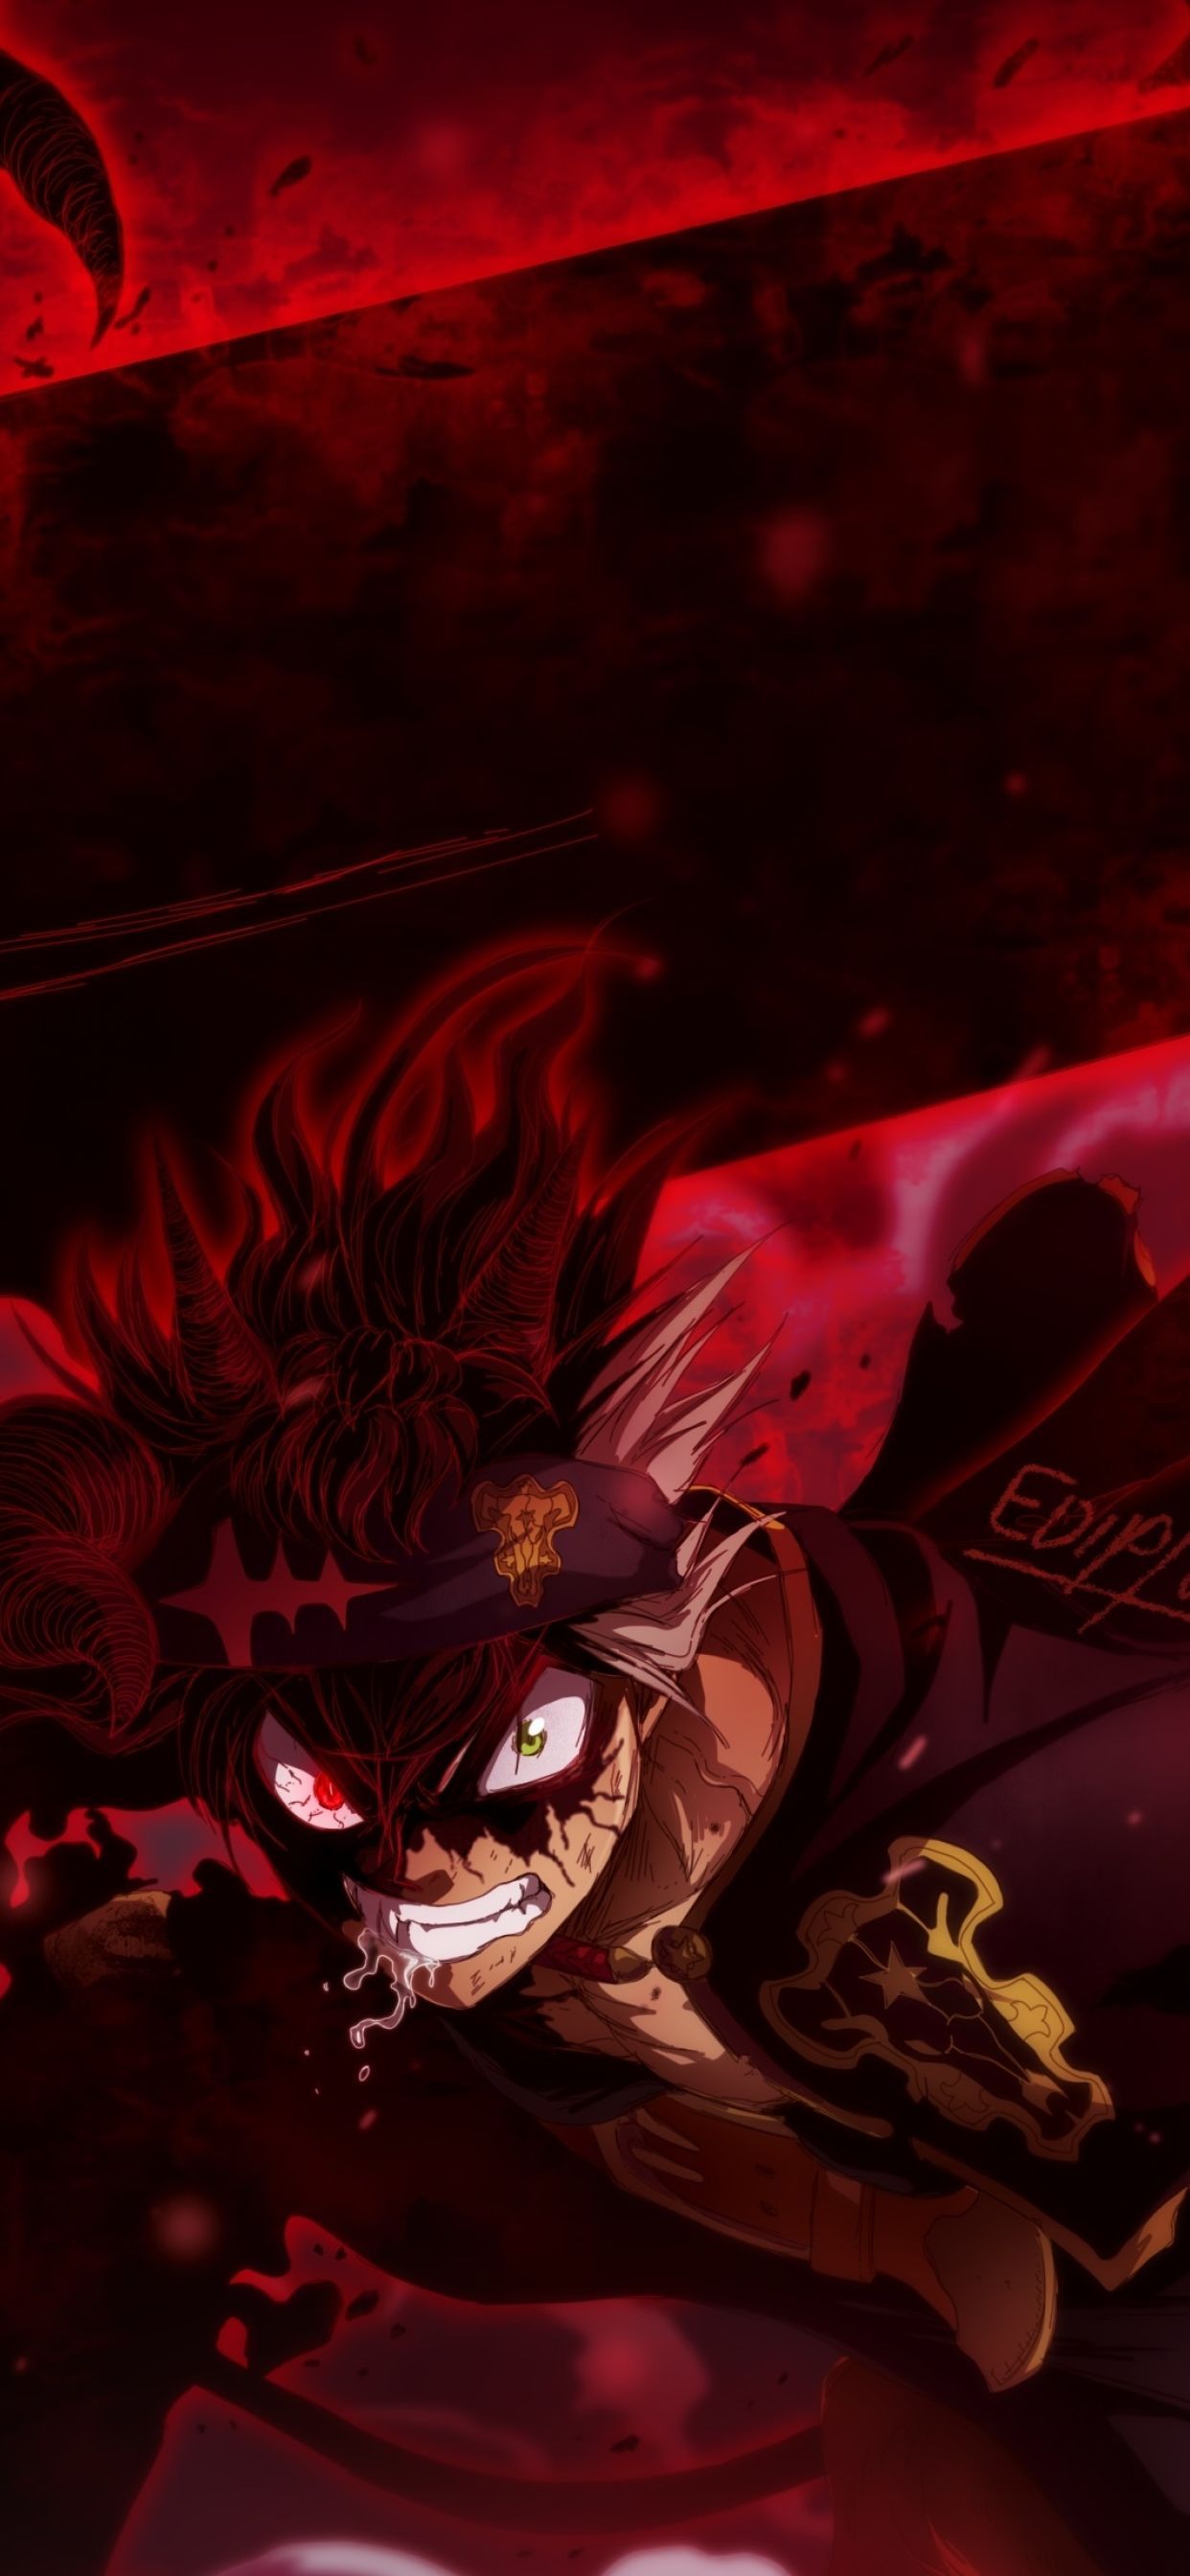 Asta in Black Clover iPhone XS MAX Wallpaper, HD Anime 4K Wallpaper, Image, Photo and Background Den. Black clover anime, Cute black wallpaper, HD anime wallpaper